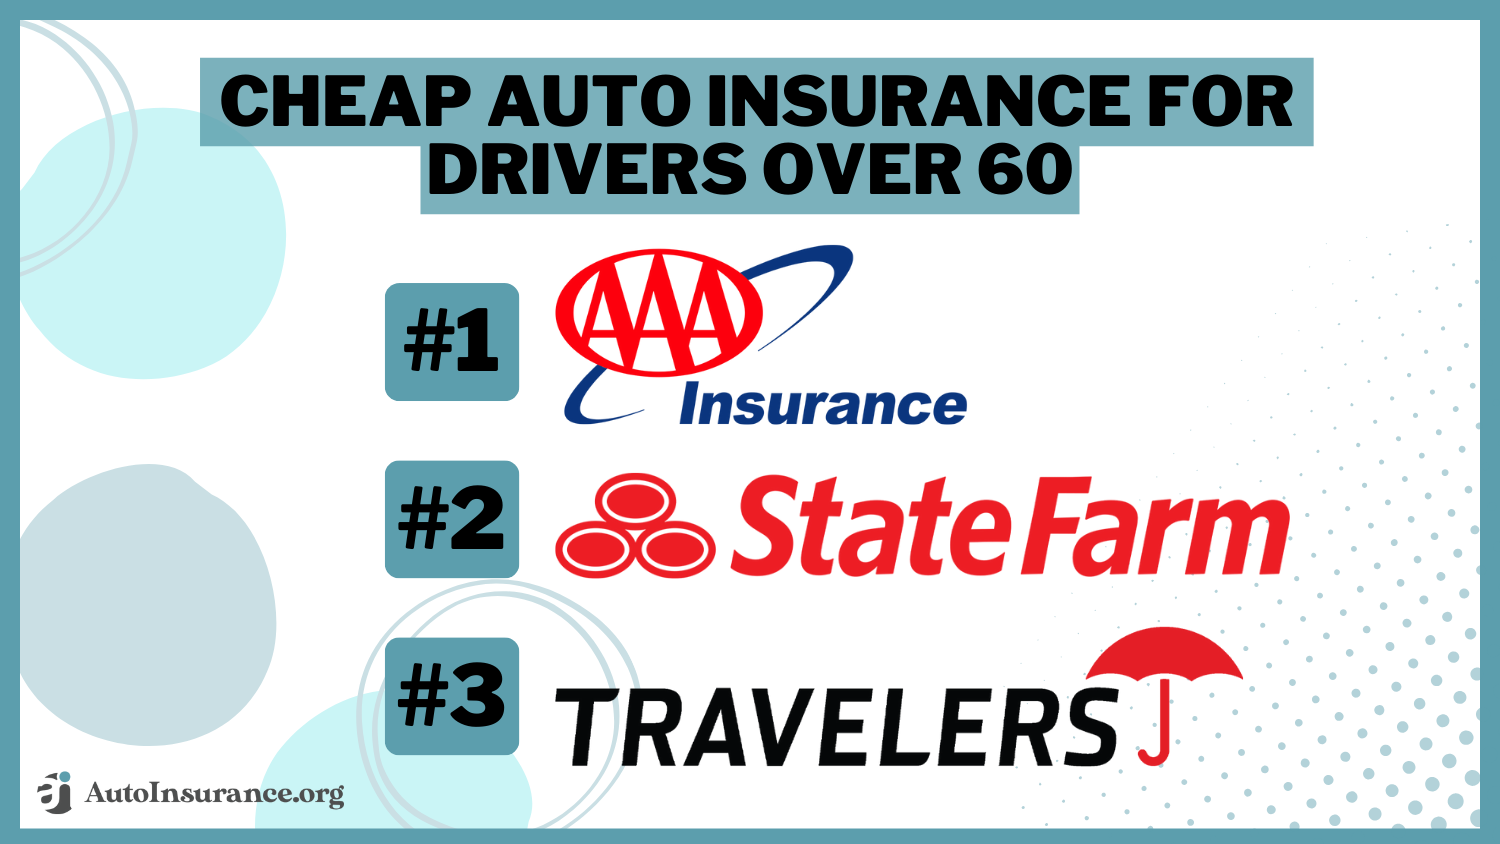 Cheap Auto Insurance For Drivers Over 60 - AAA, State Farm, Travelers